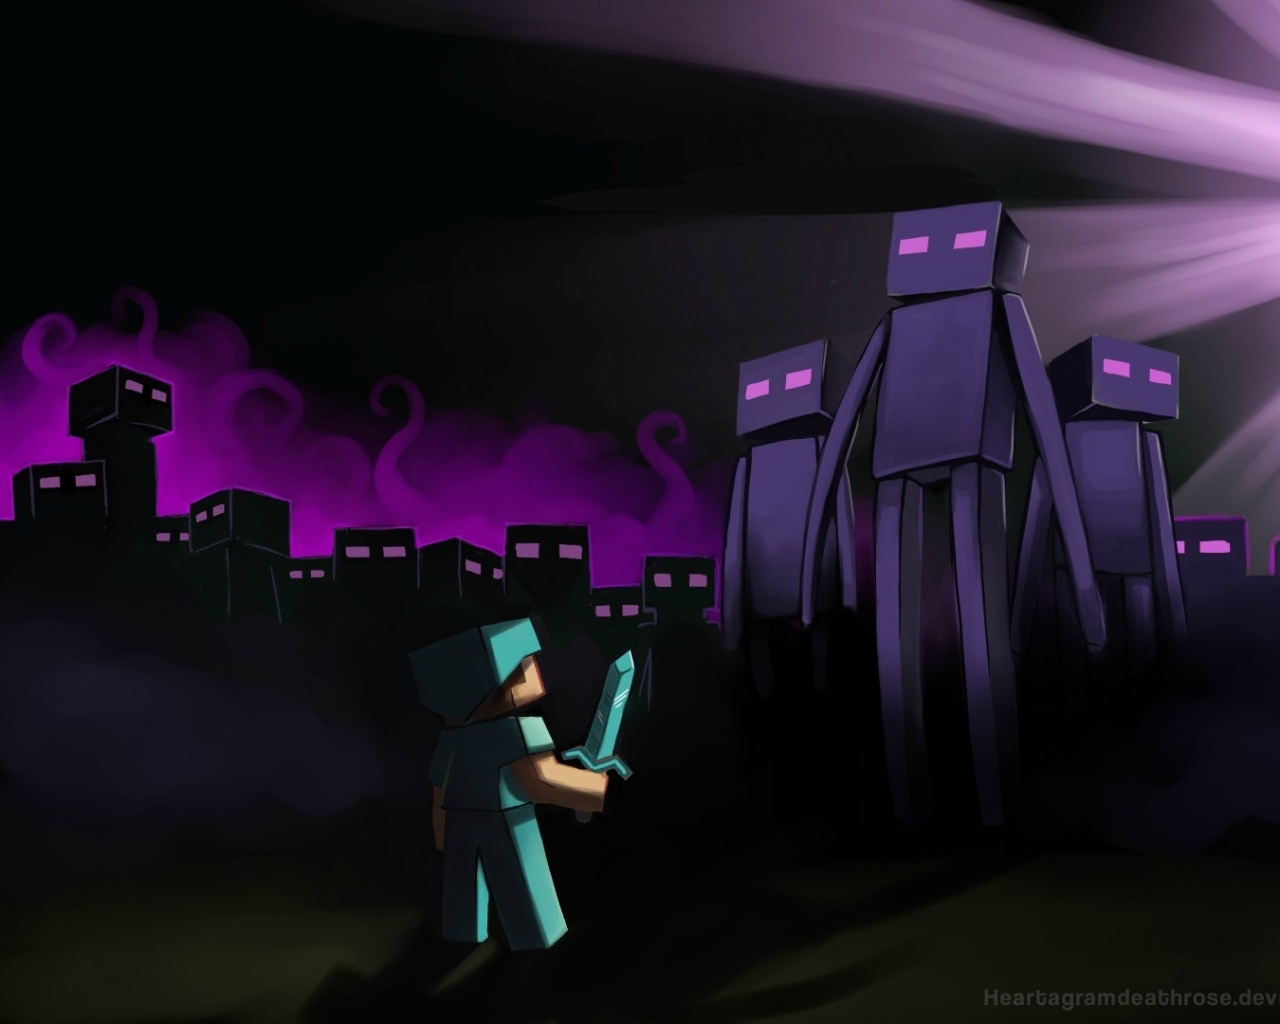 Enderman Wallpaper Seeds For Minecraft Cool Xbox To